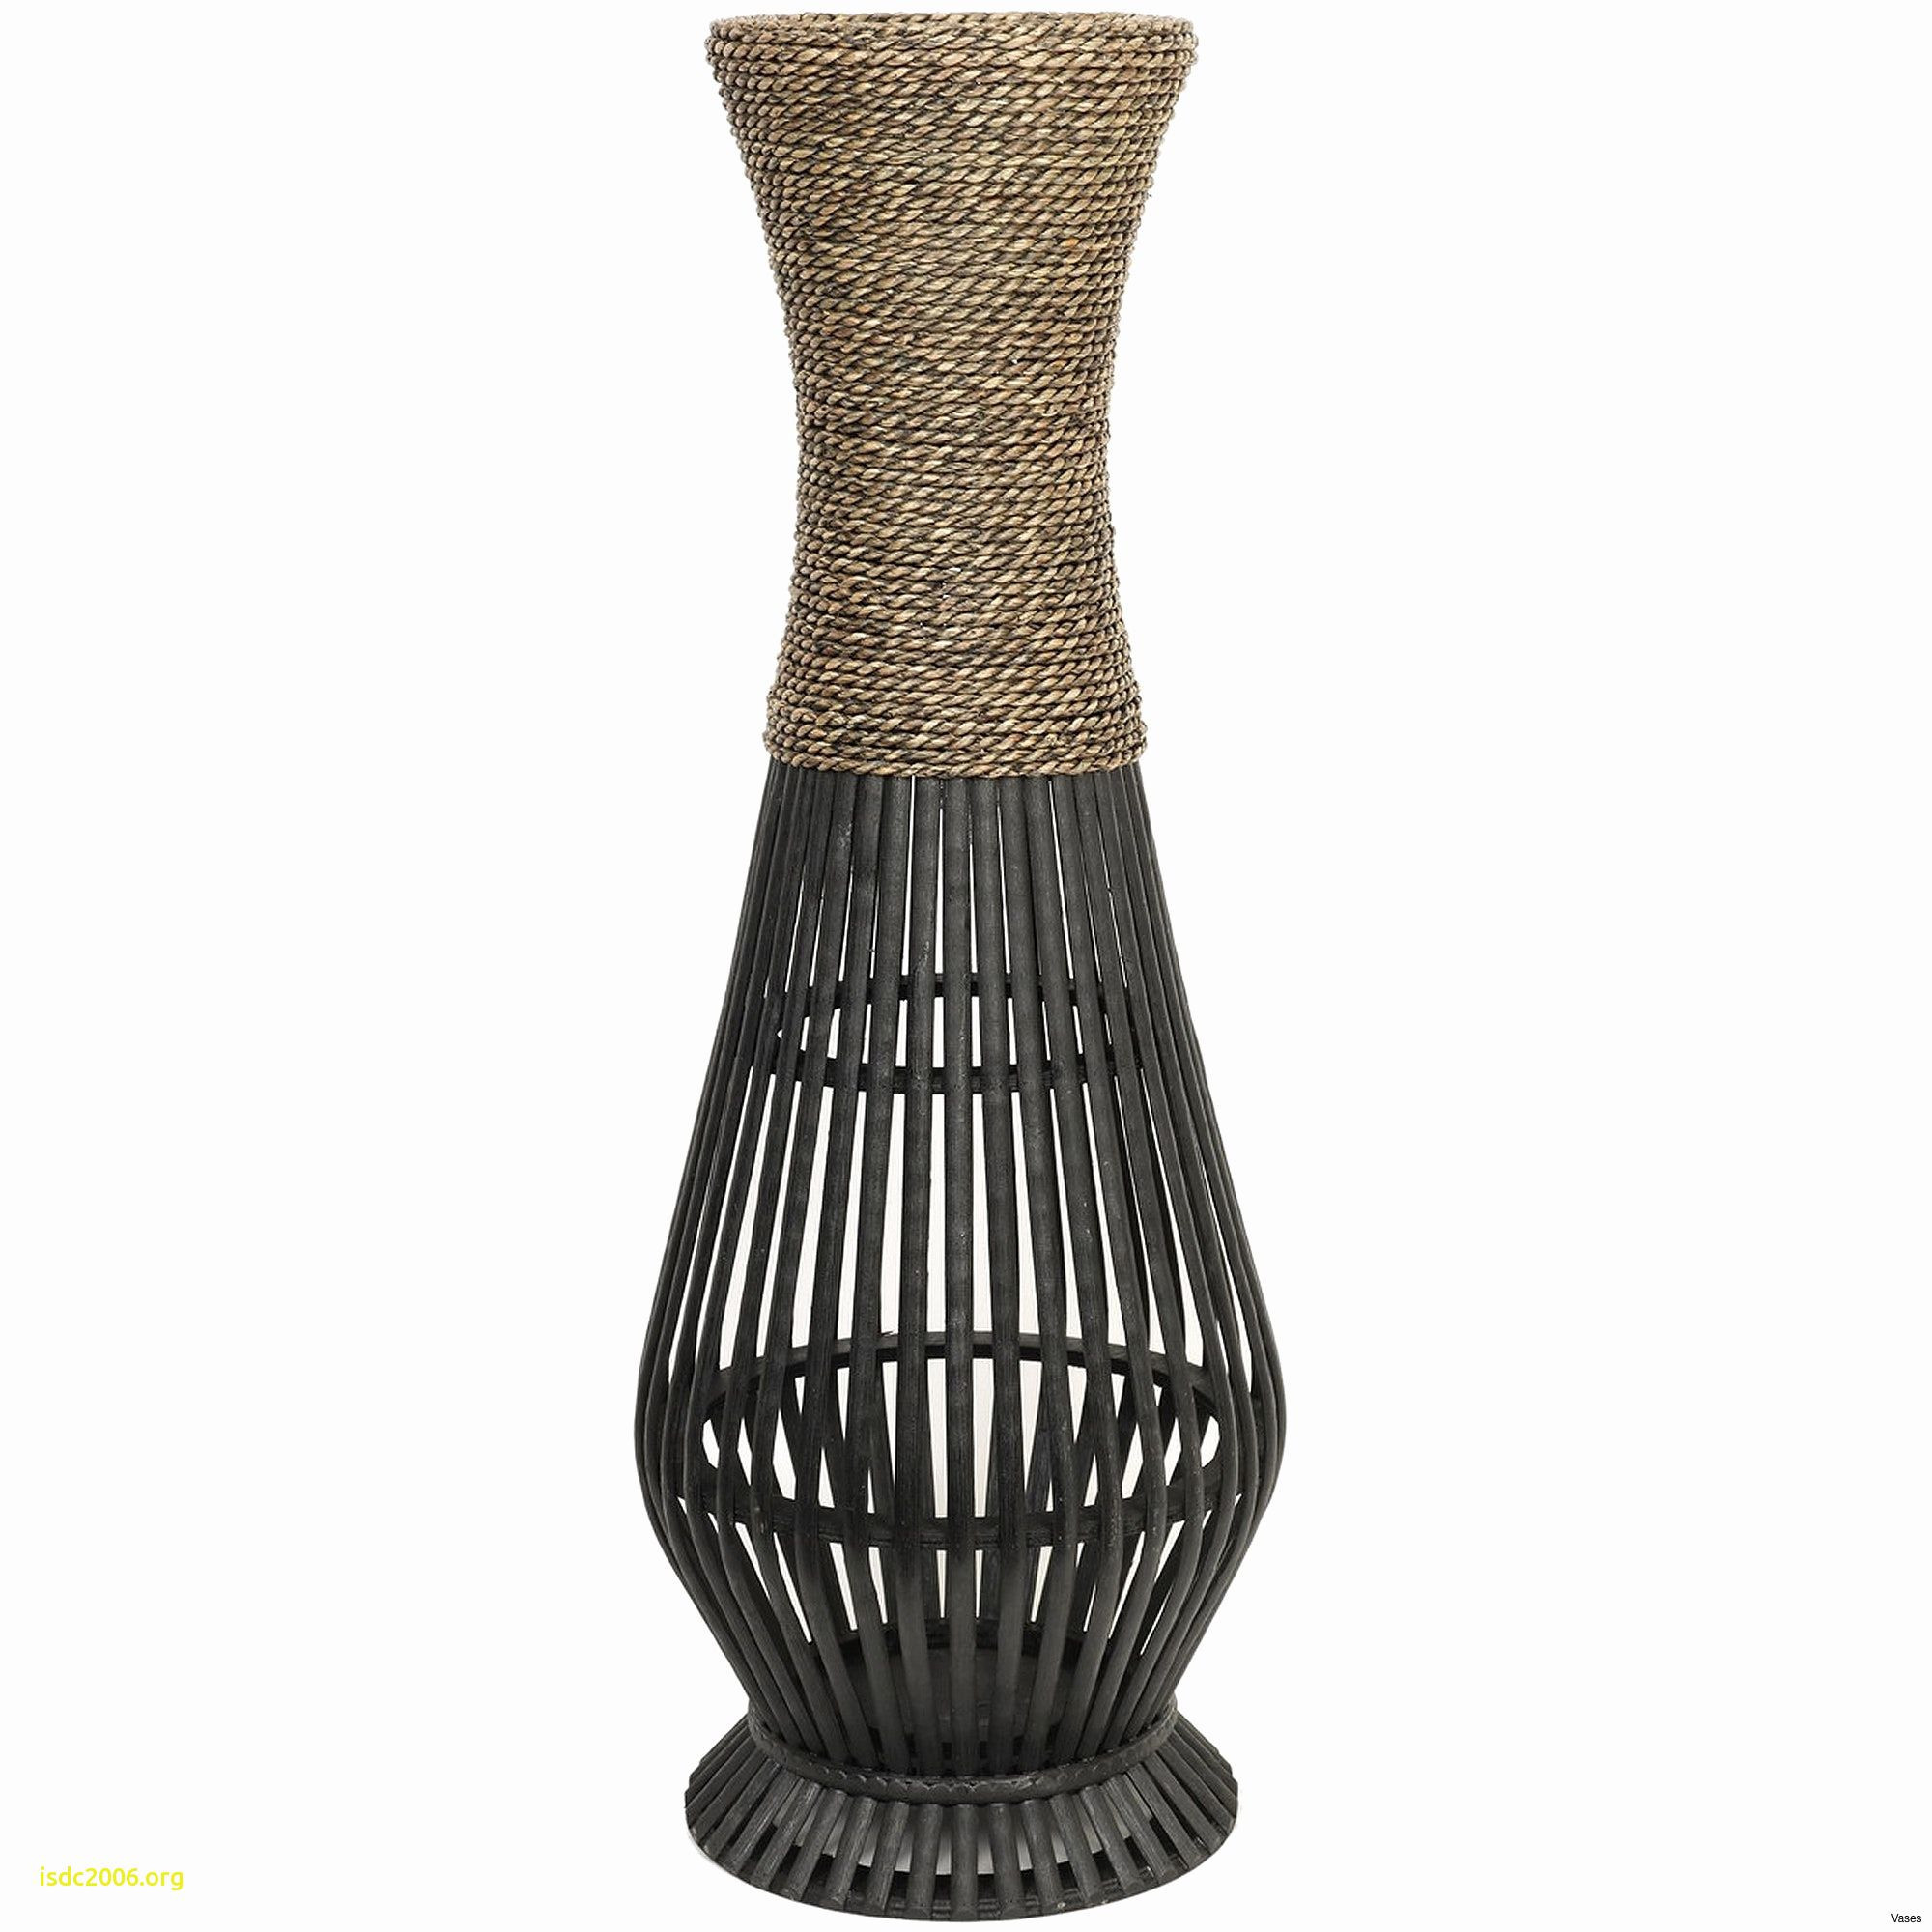 11 Fashionable Decorative Wood Sticks for Vases 2024 free download decorative wood sticks for vases of tall wood vase photograph wooden home decor lovely d dkbrw 5743 1h with tall wood vase photos new home decor vases house design and decoration idea of tal